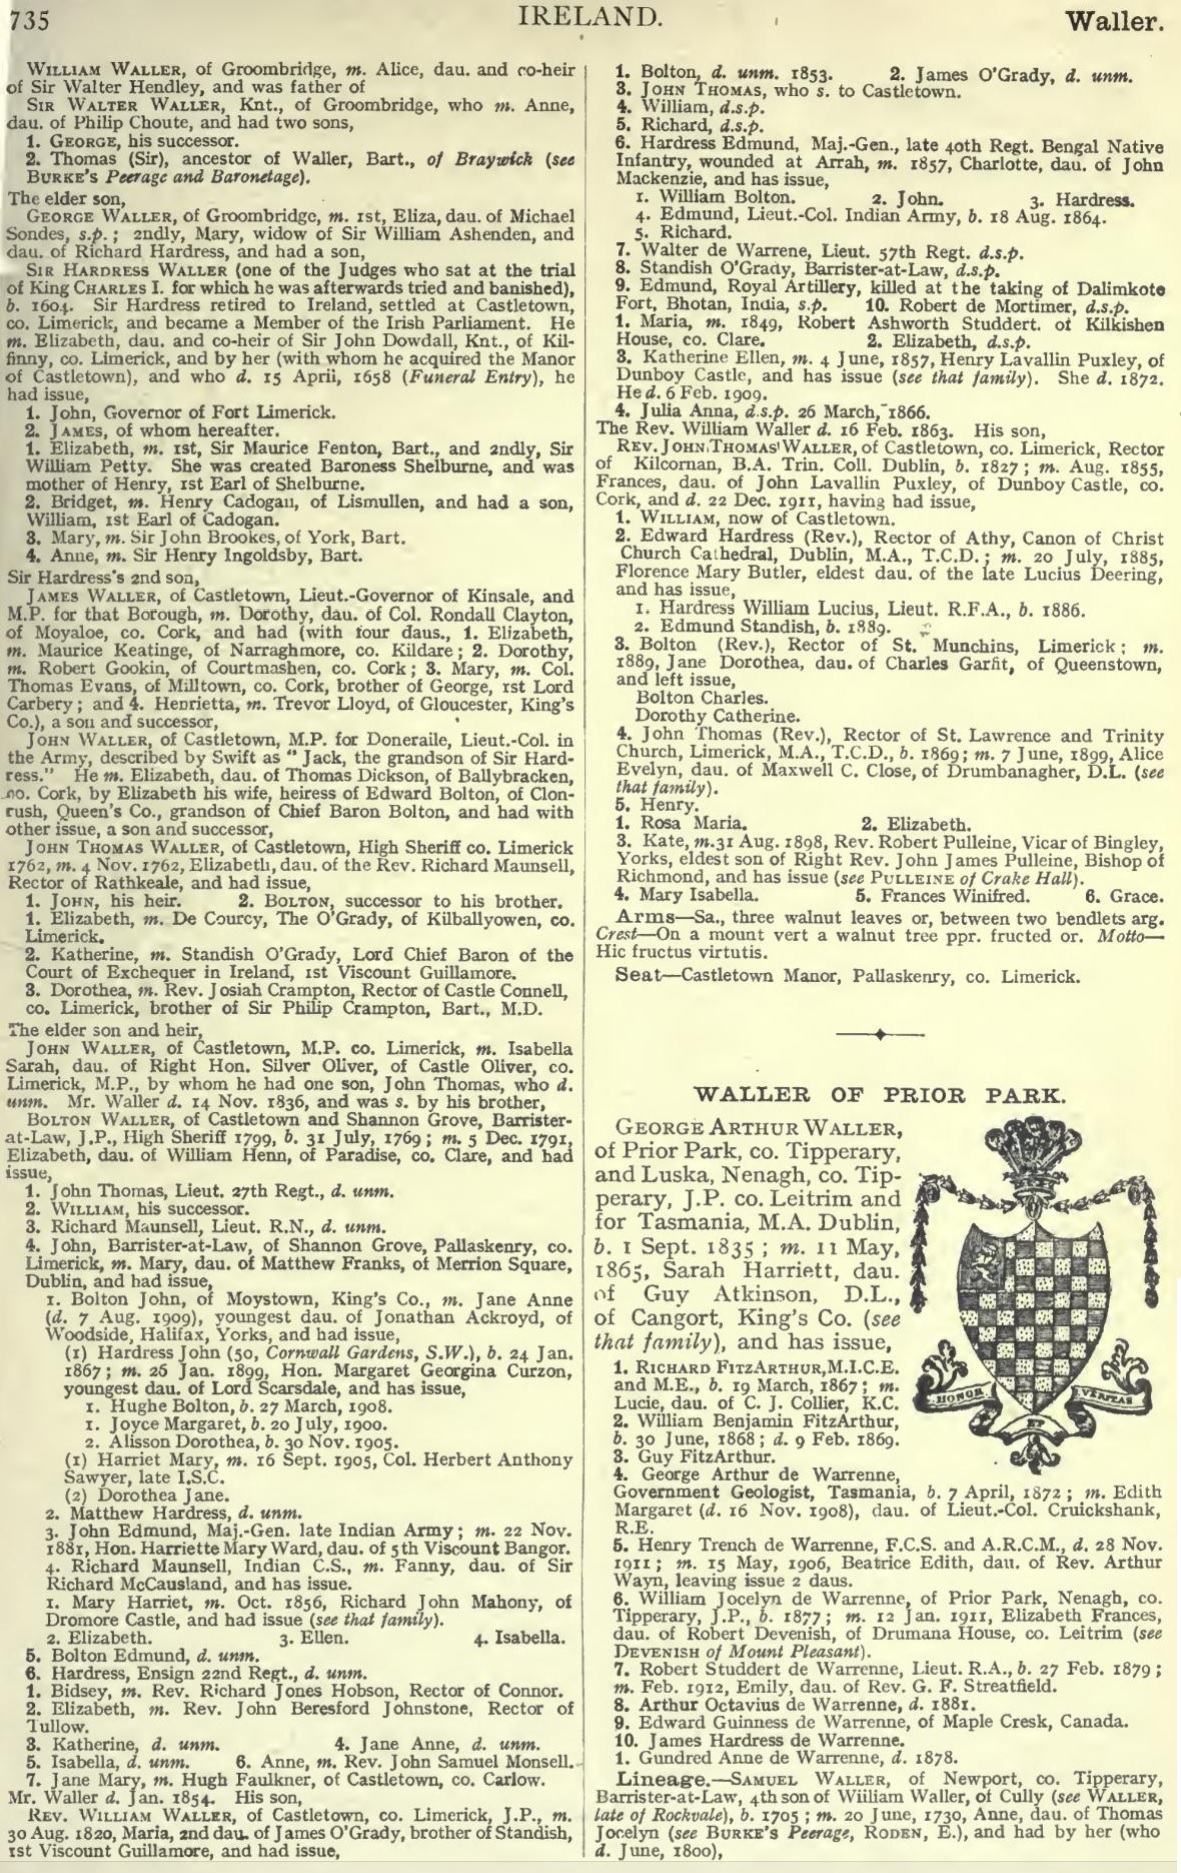 Hardress Waller - Genealogy, Linked To: <a href='i8757.html' >Walter Waller Sir</a> and <a href='i6404.html' >George Waller</a> and <a href='i6402.html' >Hardress Waller Sir ⭐</a> and <a href='i4050.html' >John Waller</a>